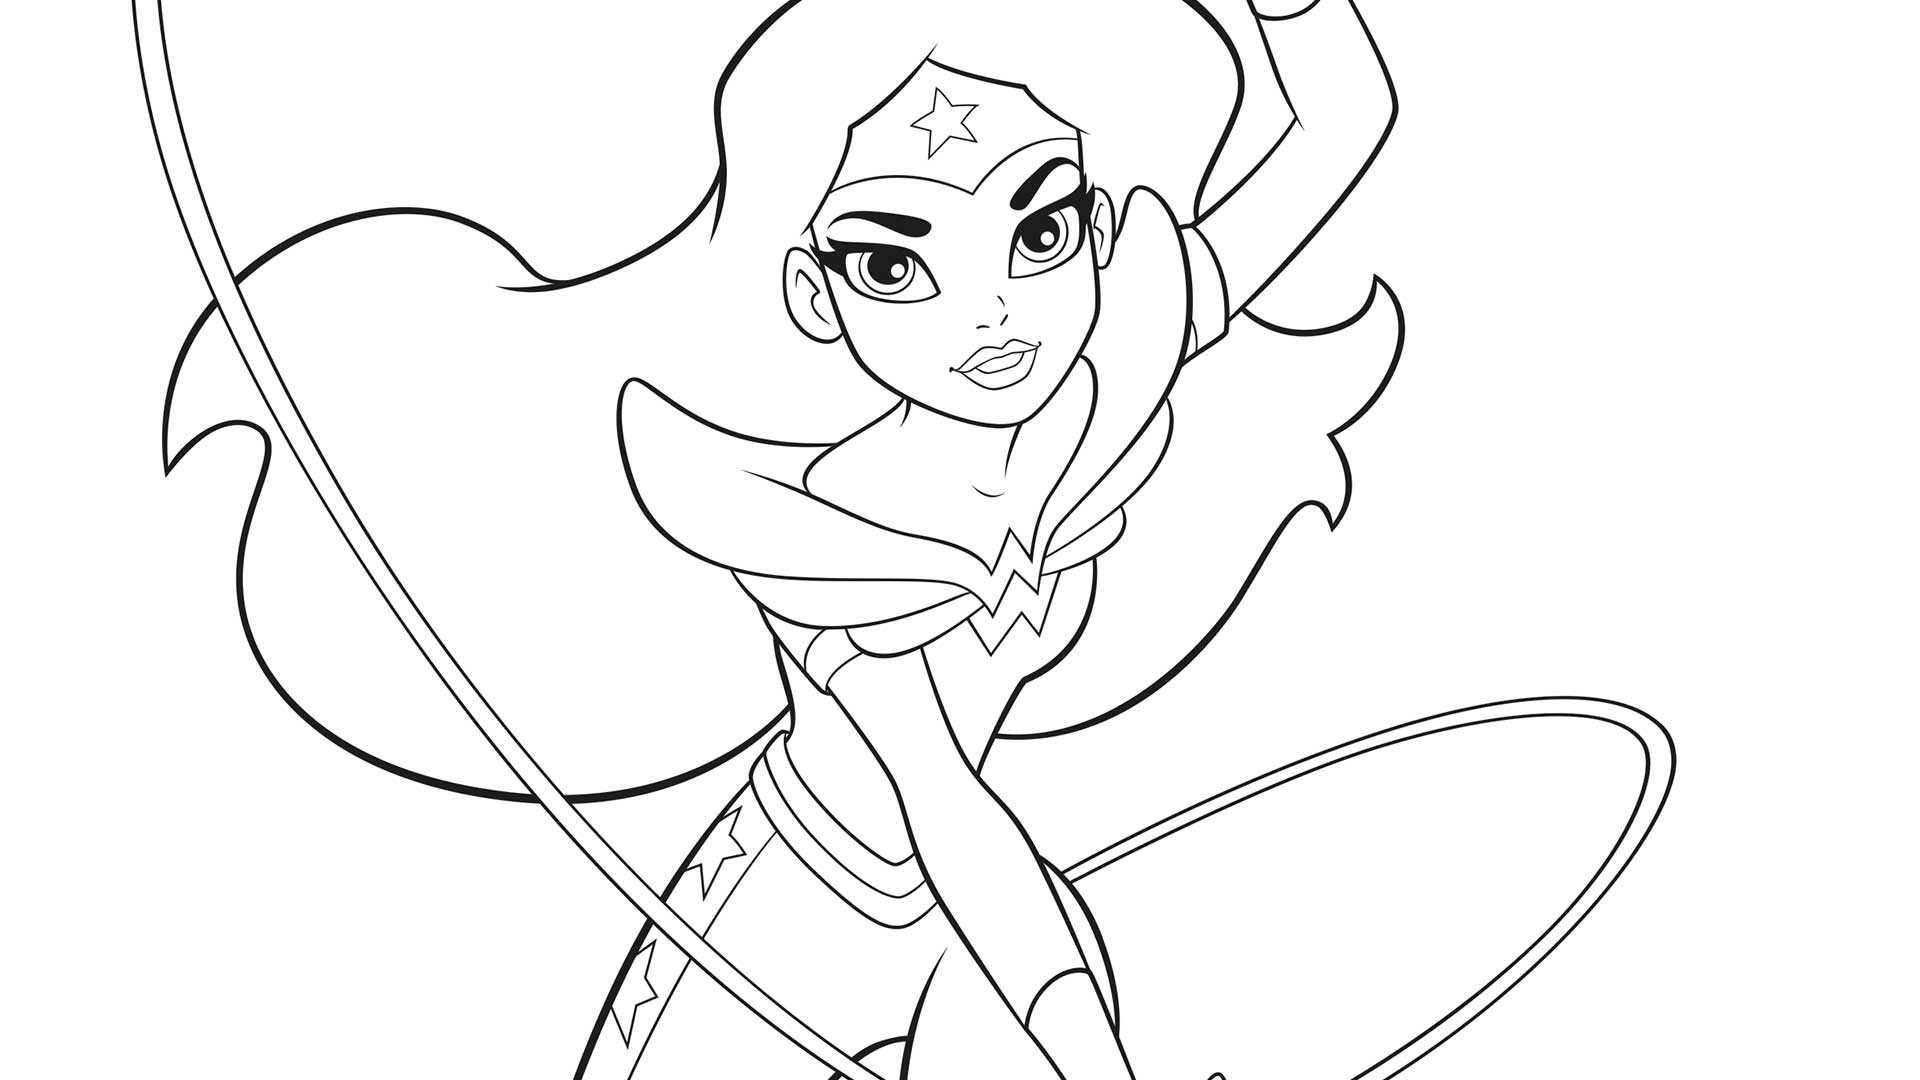 Superhero Girls Coloring Pages
 DC SUPER HERO GIRLS A KIDS COLORING BOOK